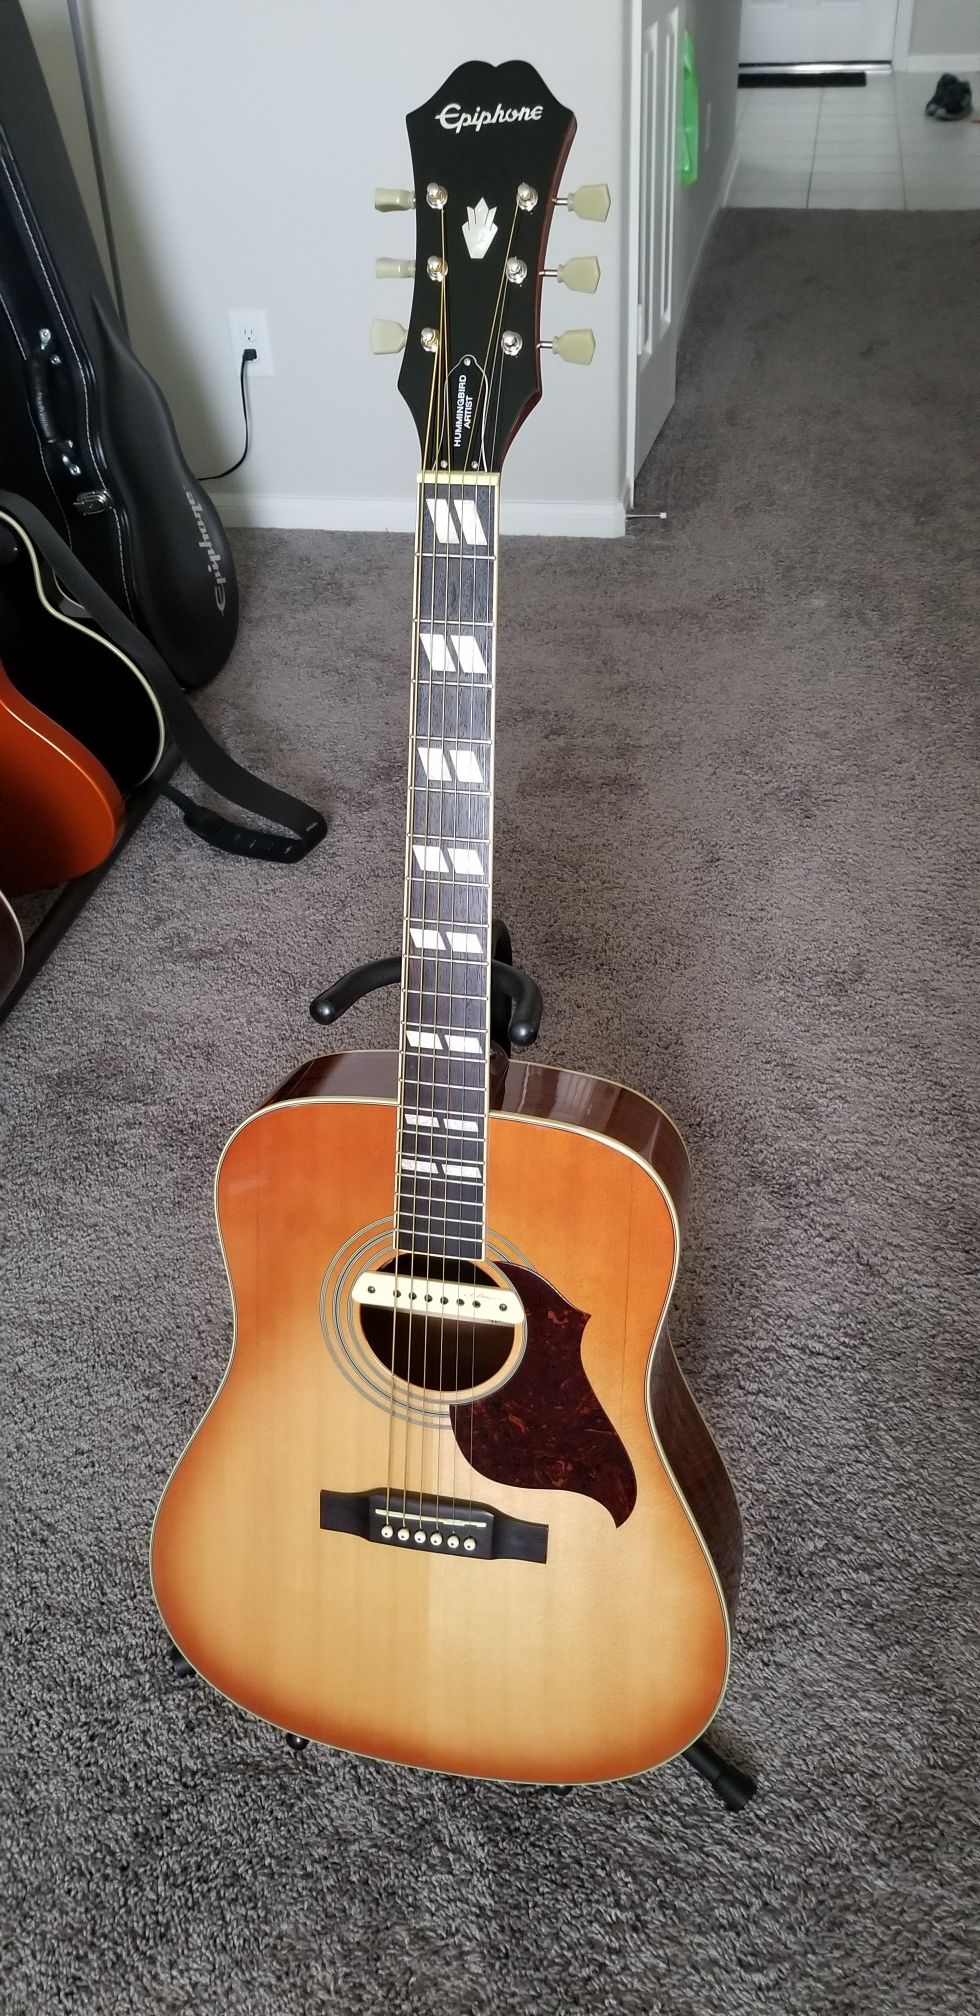 Epiphone Acustic Guitar with LRBaggs Pickup *MINT*